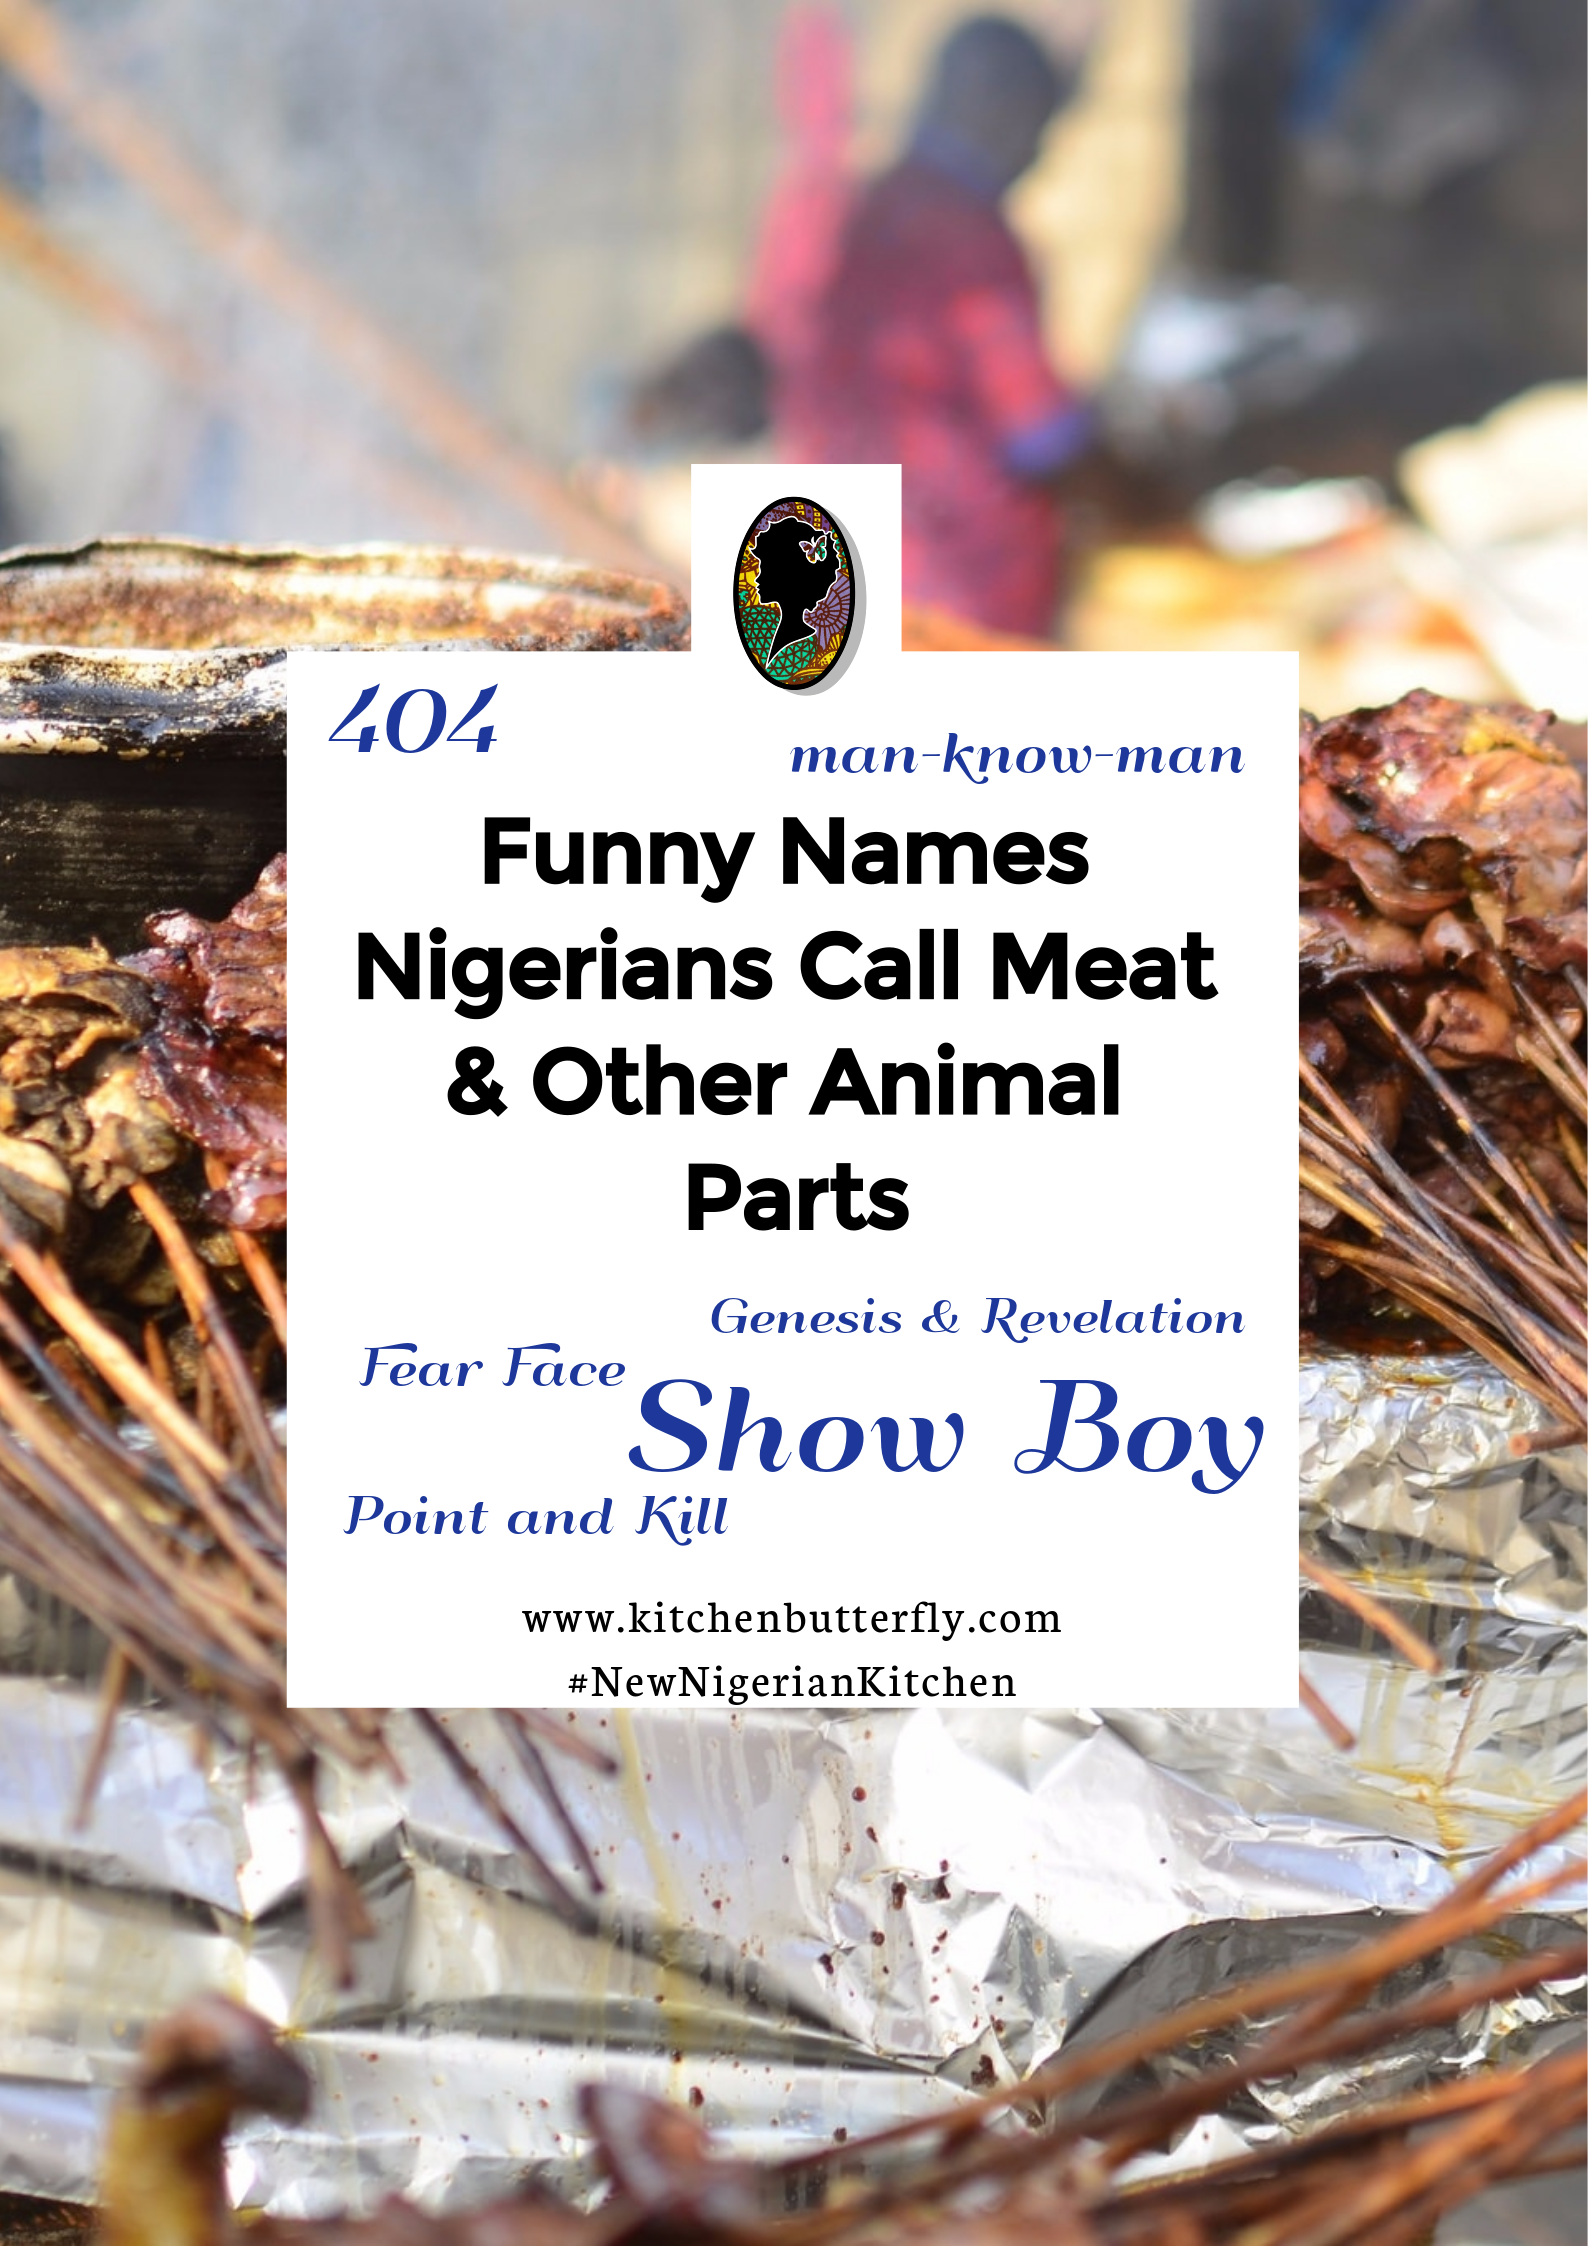 Funny Names Nigerians Call Meat & Other Animal Parts - Kitchen Butterfly